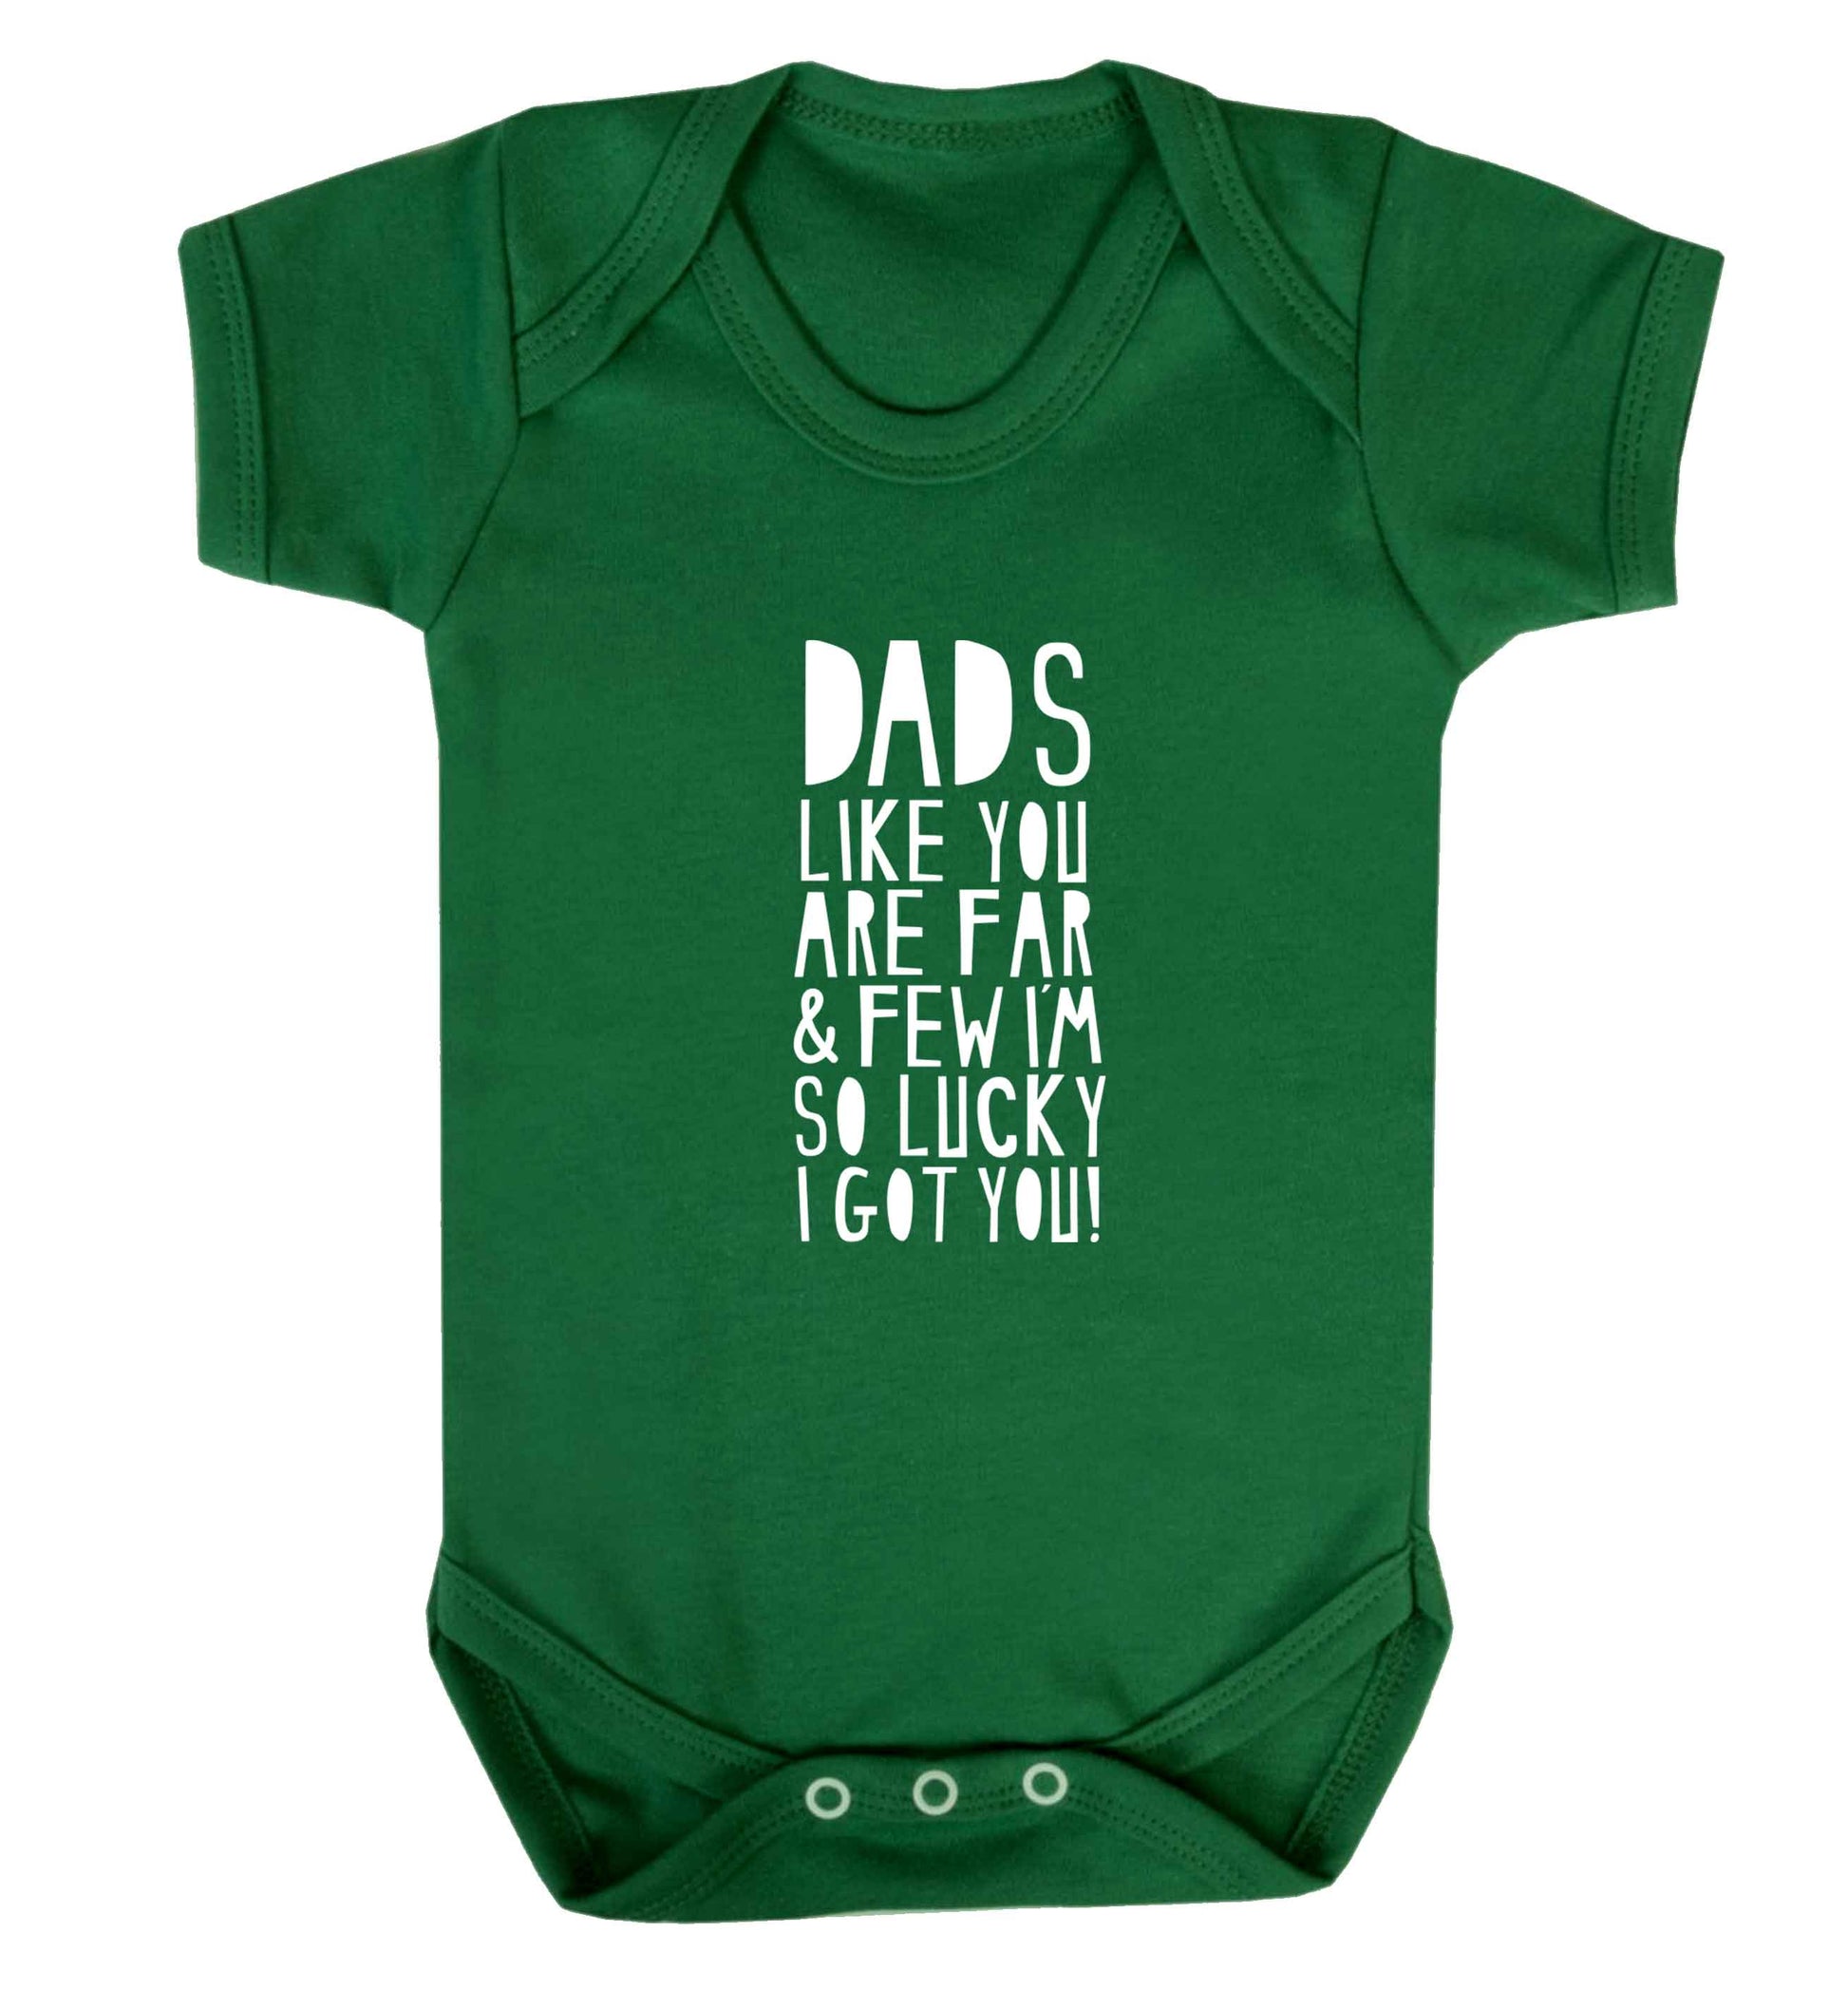 Dads like you are far and few I'm so luck I got you! baby vest green 18-24 months